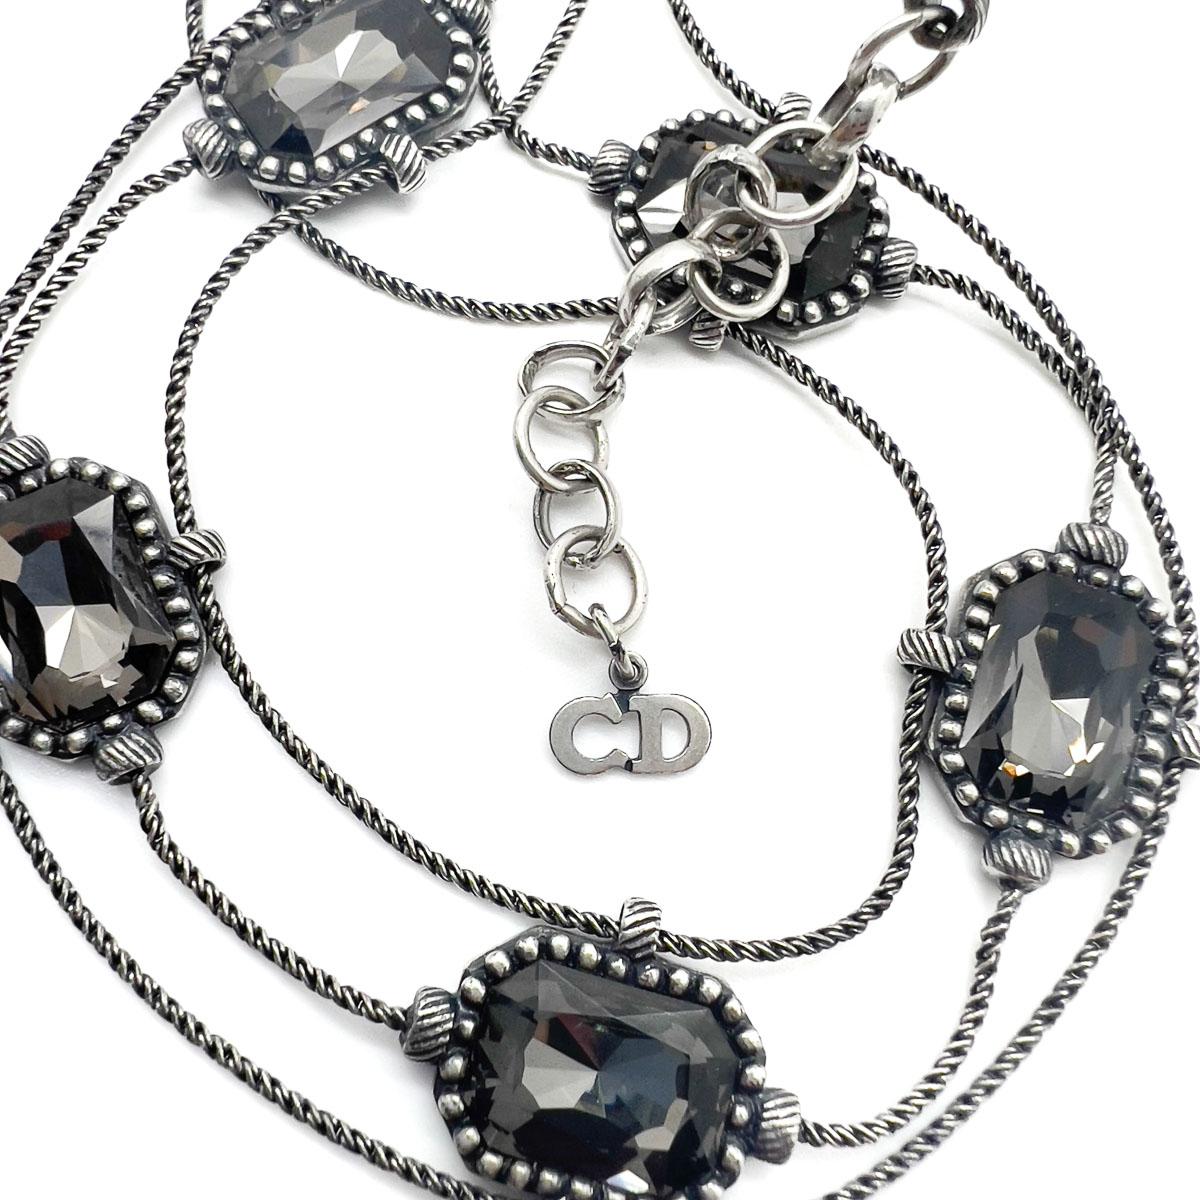 A sublime Vintage Christian Dior Blackened Crystal Choker from Galliano's much revered tenure at the House. Large faceted smoky grey crystals adorn a line of gunmetal rope link chain, almost wire-like. Contemporary in overall design with the